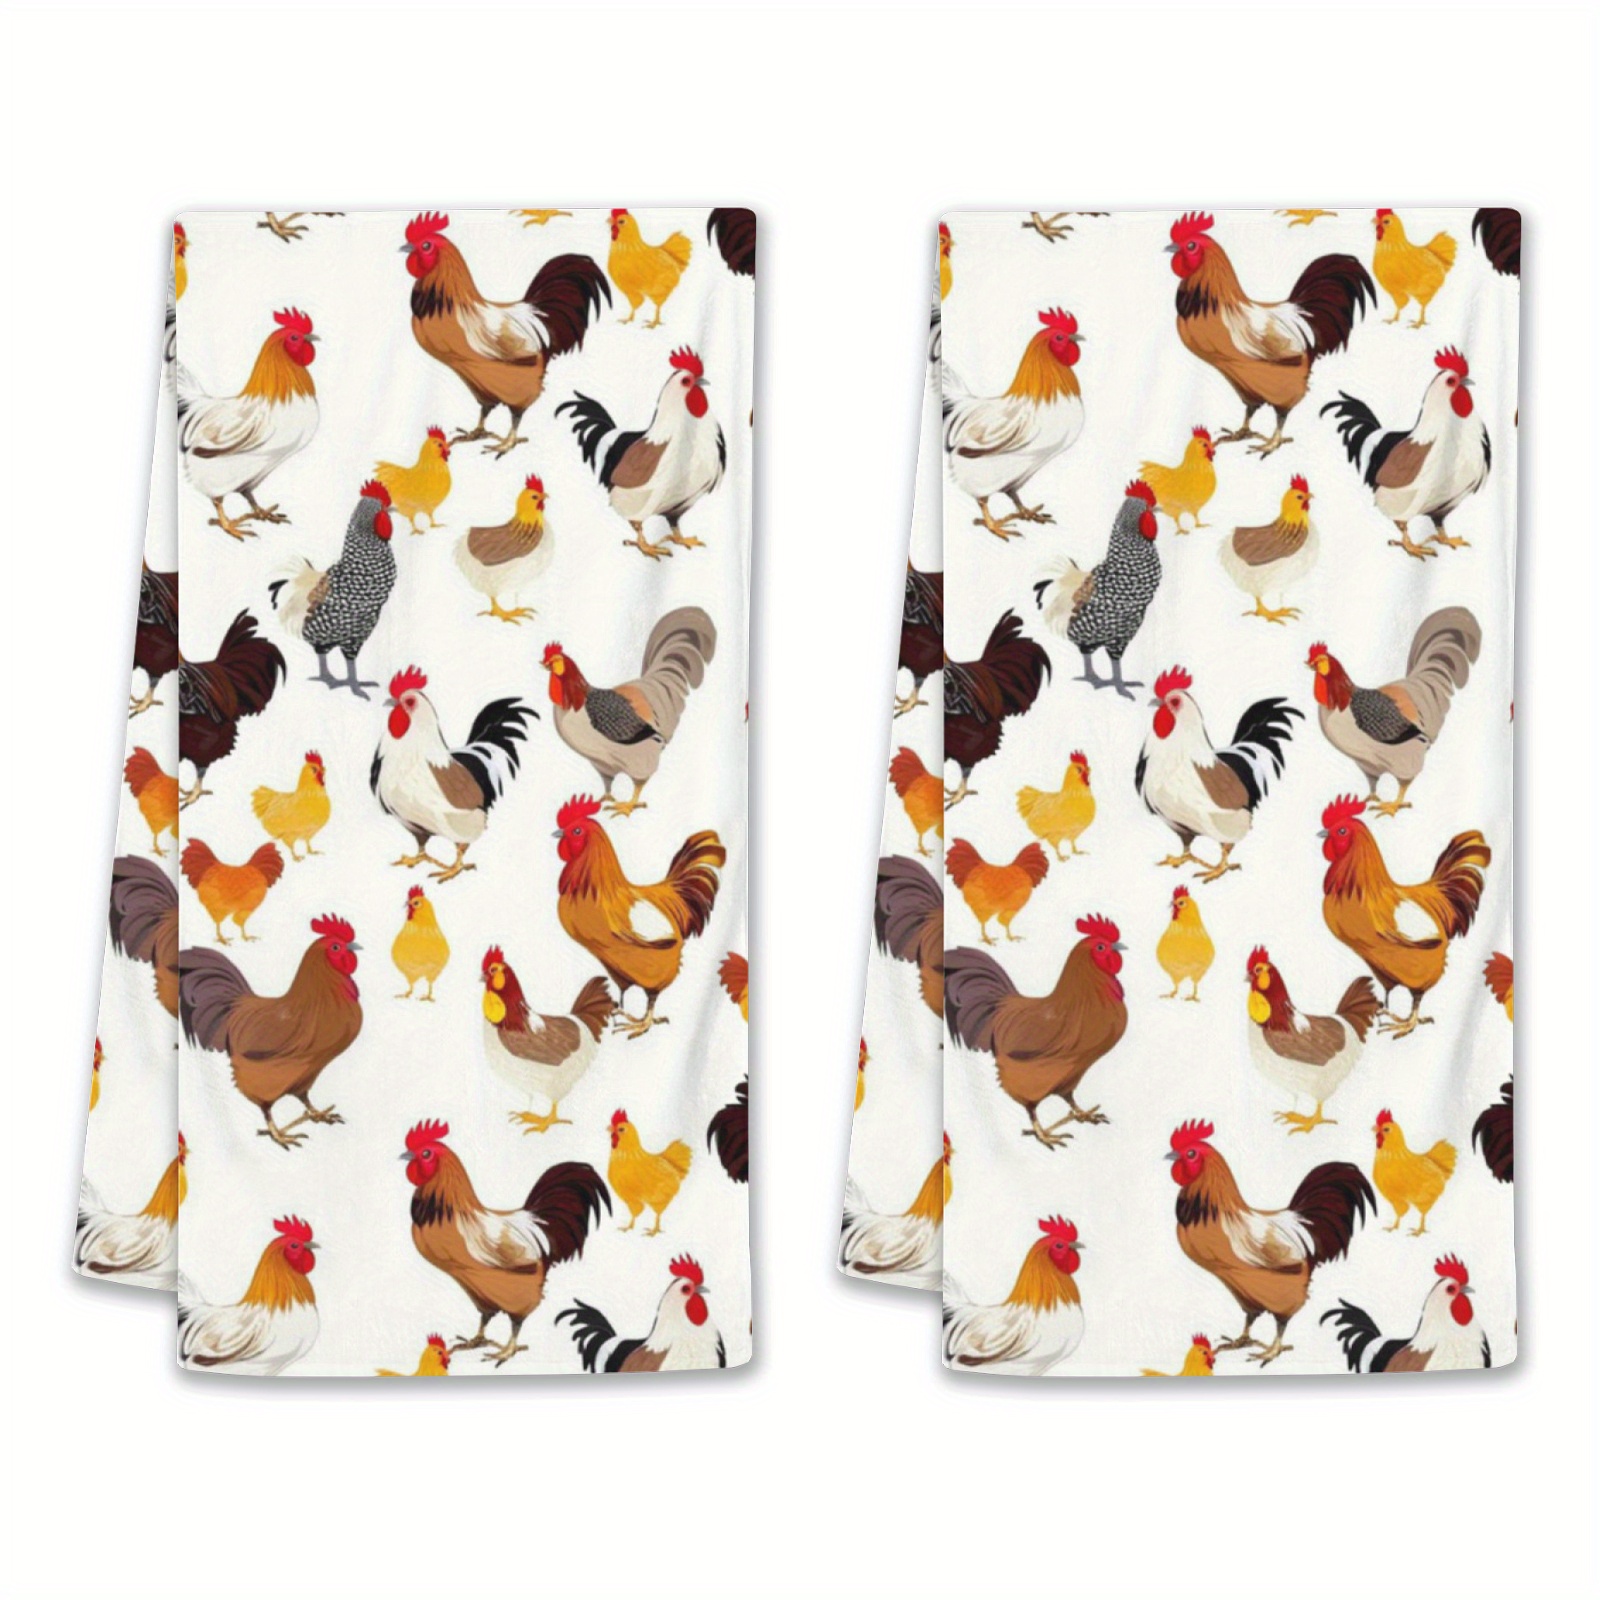 

2pcs, Hand Towel, Chicken Rooster Printed Kitchen Decorative Dish Towels, Farmhouse Style Absorbent Cloth Tea Towels For Cooking, Baking, Housewarming Gifts, Cleaning Supplies, Bathroom Supplies